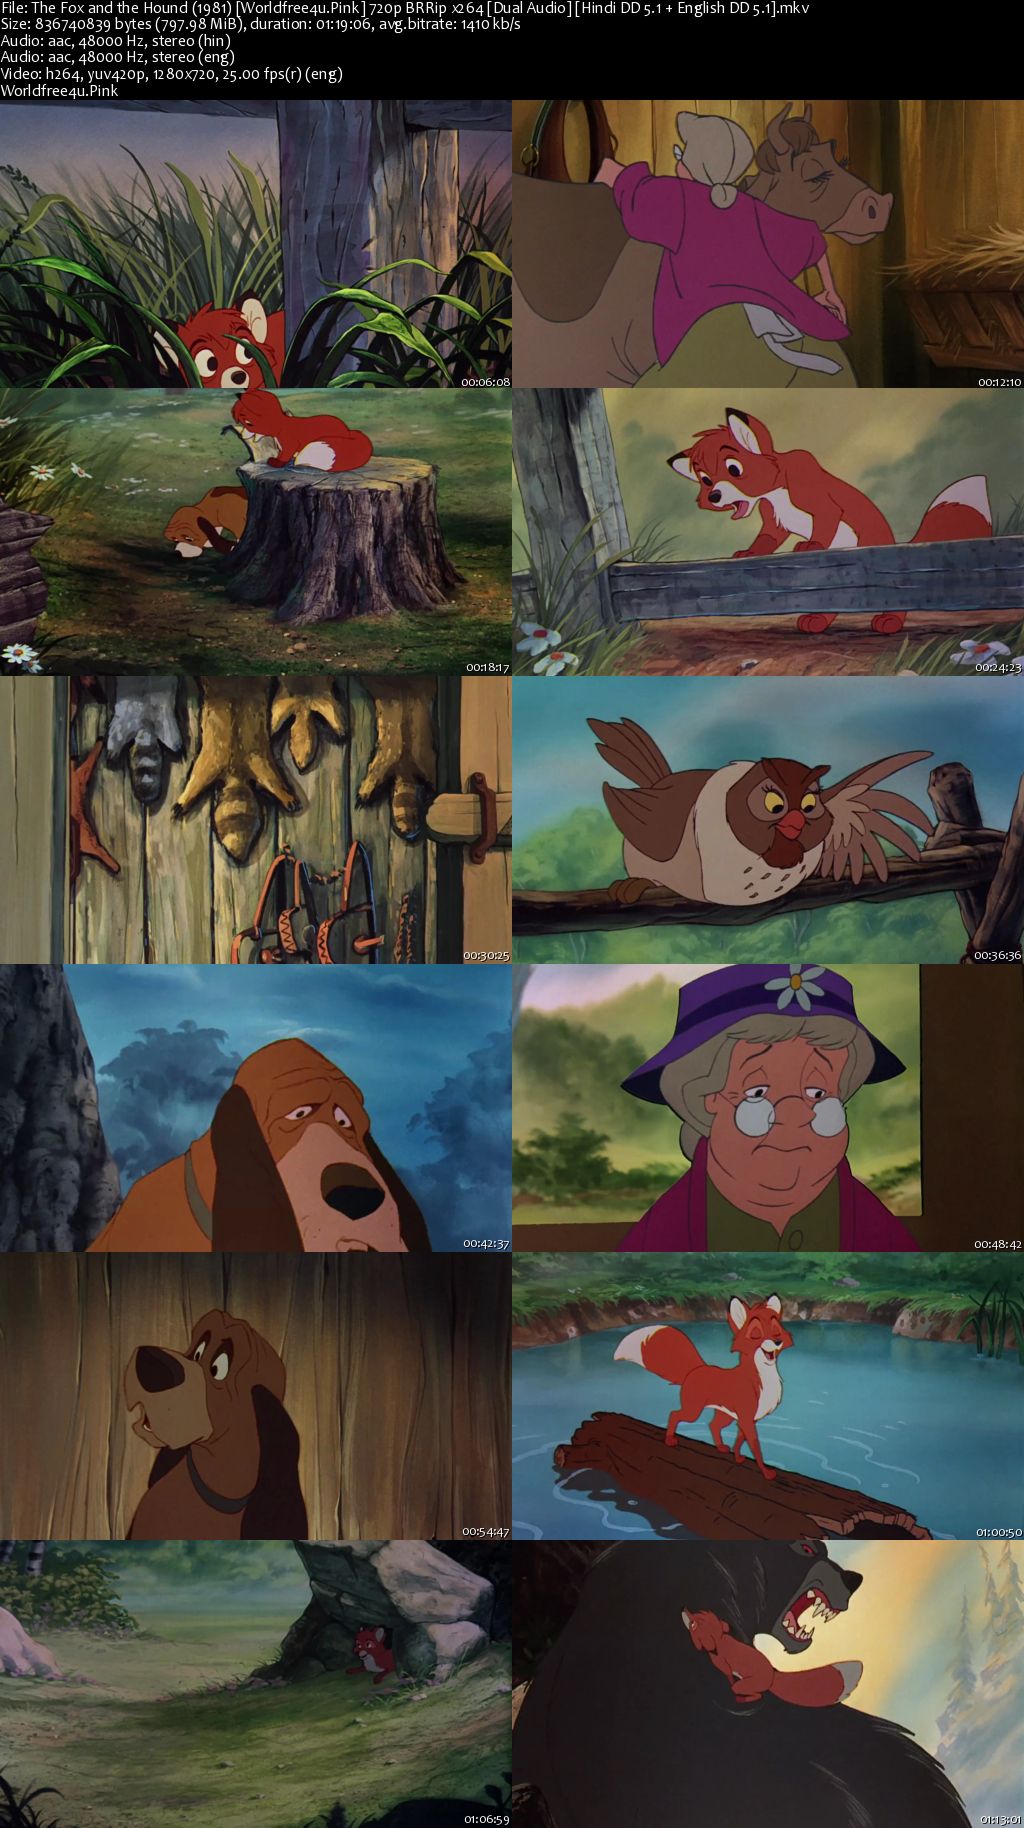 The Fox And The Hound 1981 BRRip 720p Dual Audio